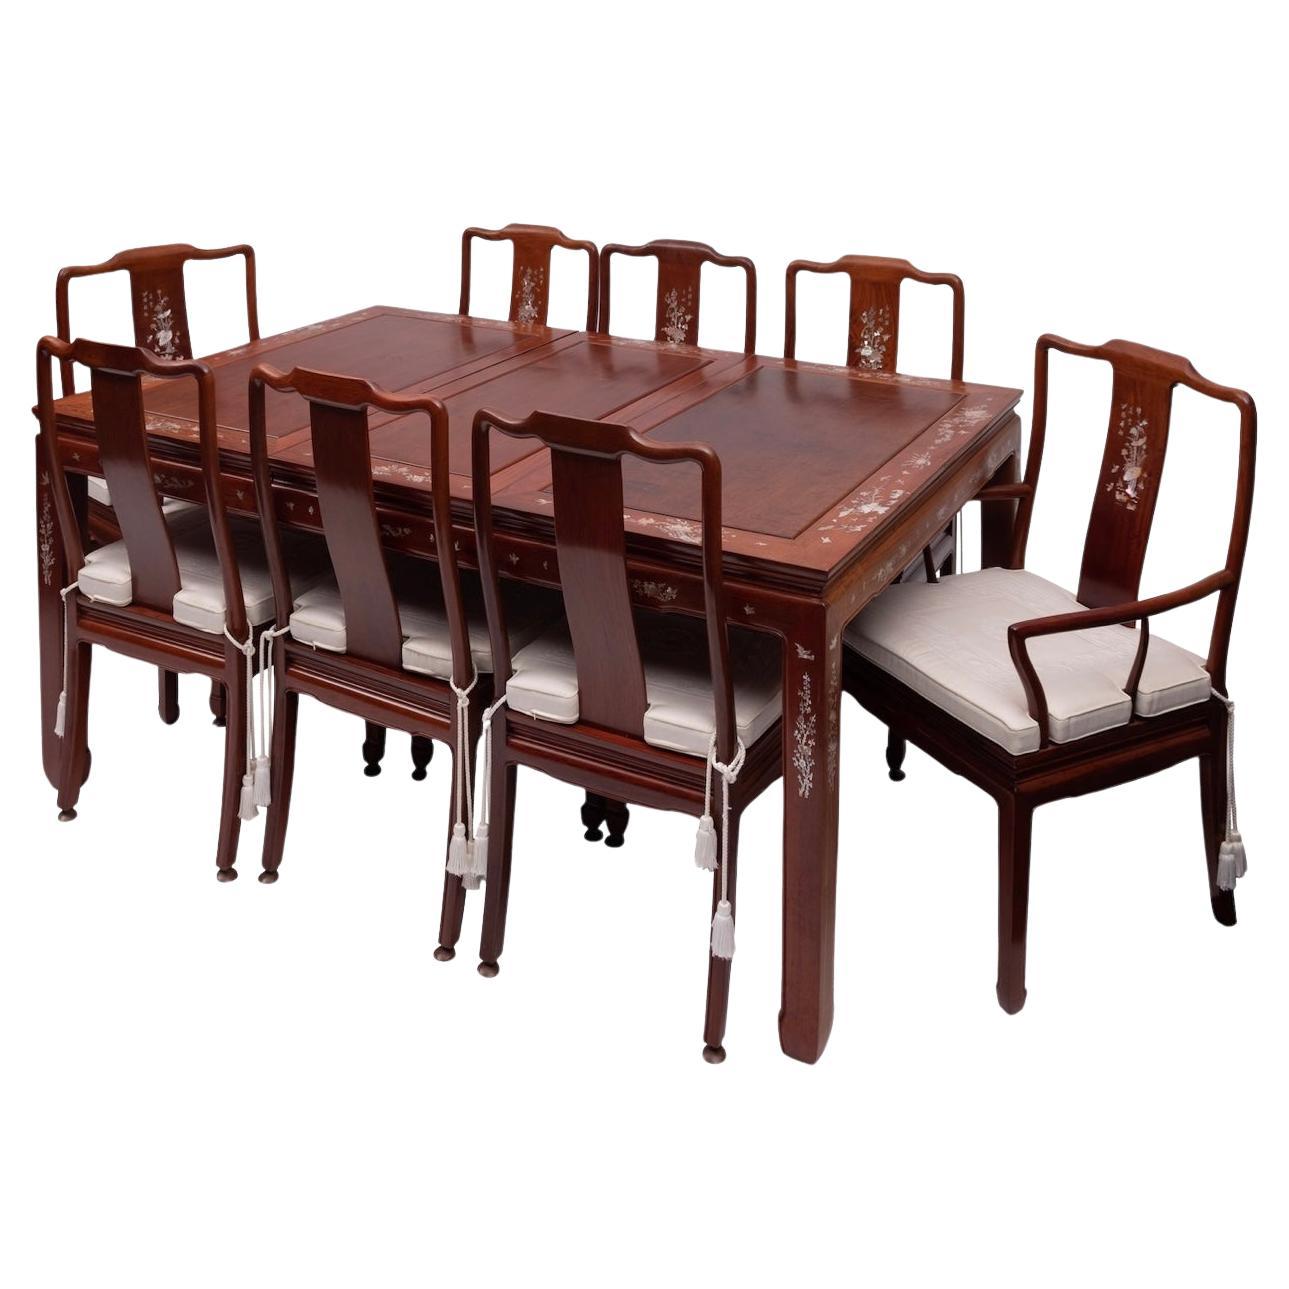 Stunning Asian Hardwood And Mother-of-pearl Inset Dining Table And Eight Chairs For Sale